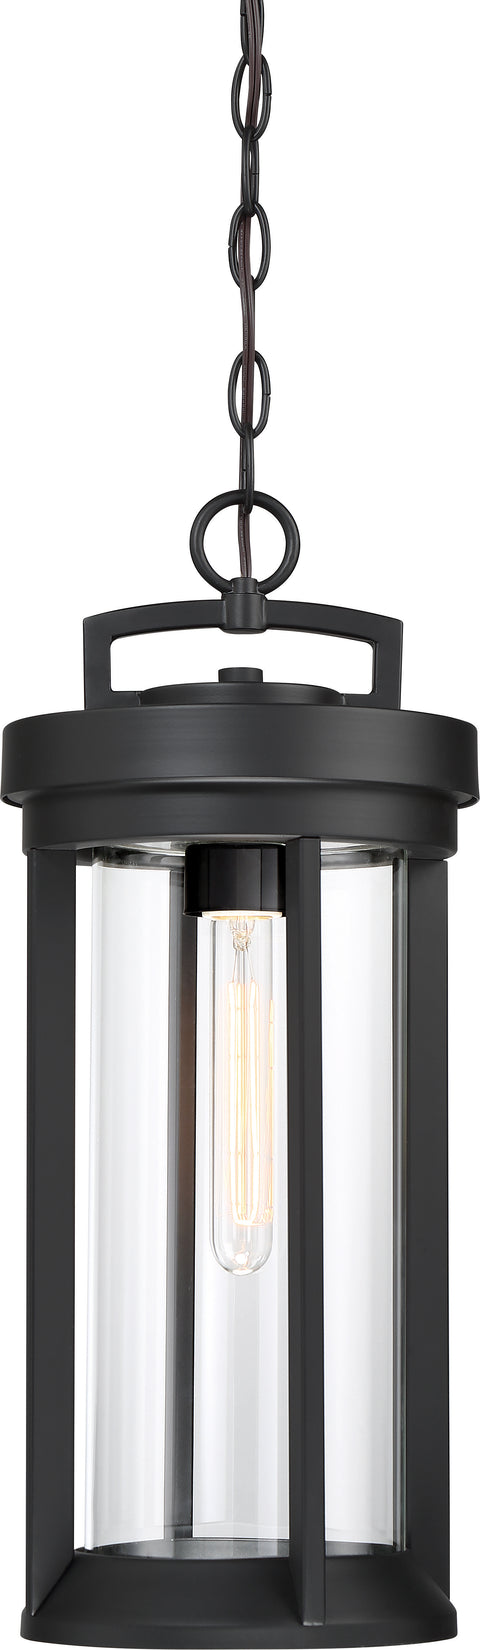 Nuvo Lighting 60/6504 Huron 1 Light Hanging Lantern Aged Bronze Finish with Clear Glass